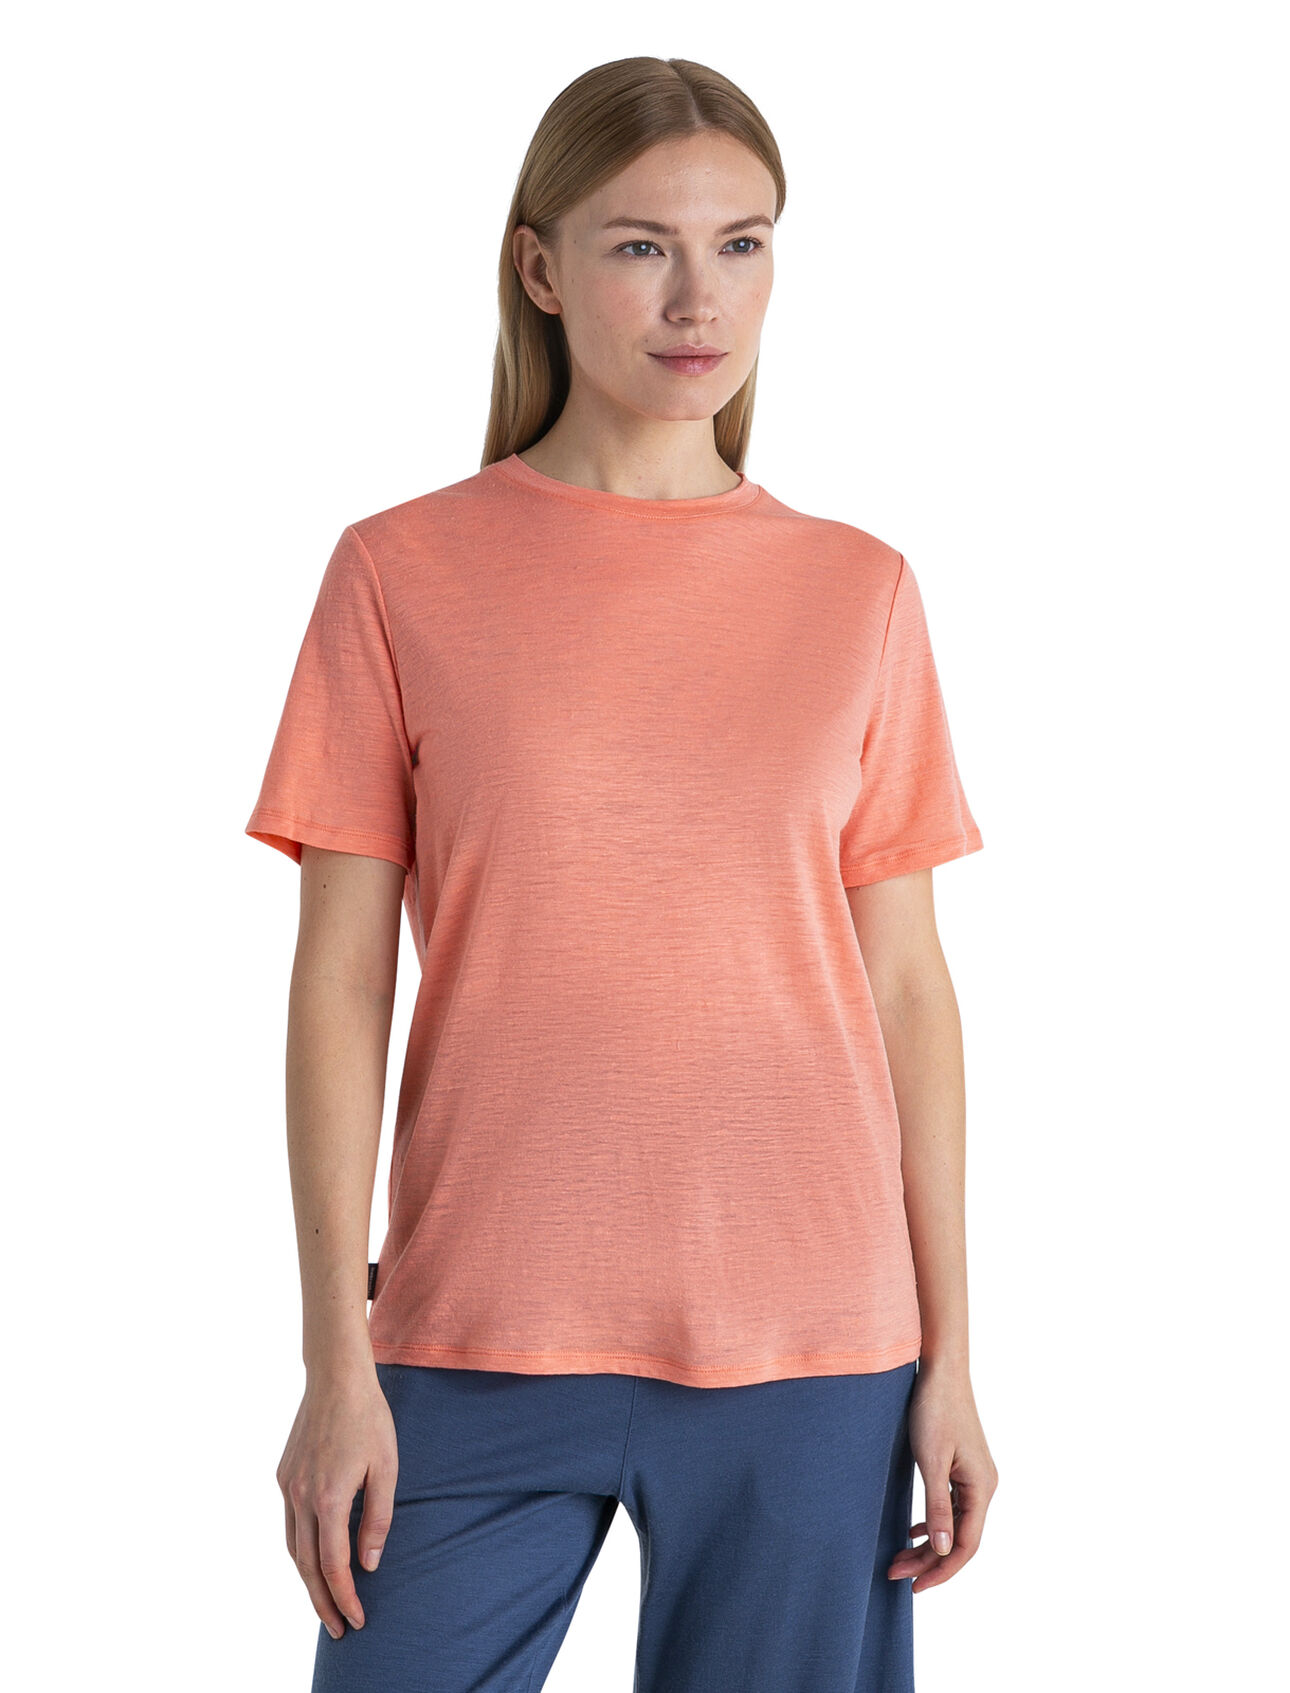 Womens Merino Linen Short Sleeve T-Shirt A lightweight, go-anywhere tee made with a soft blend of merino wool and linen, the Merino Linen Short Sleeve Tee is a staple for everyday comfort and style.